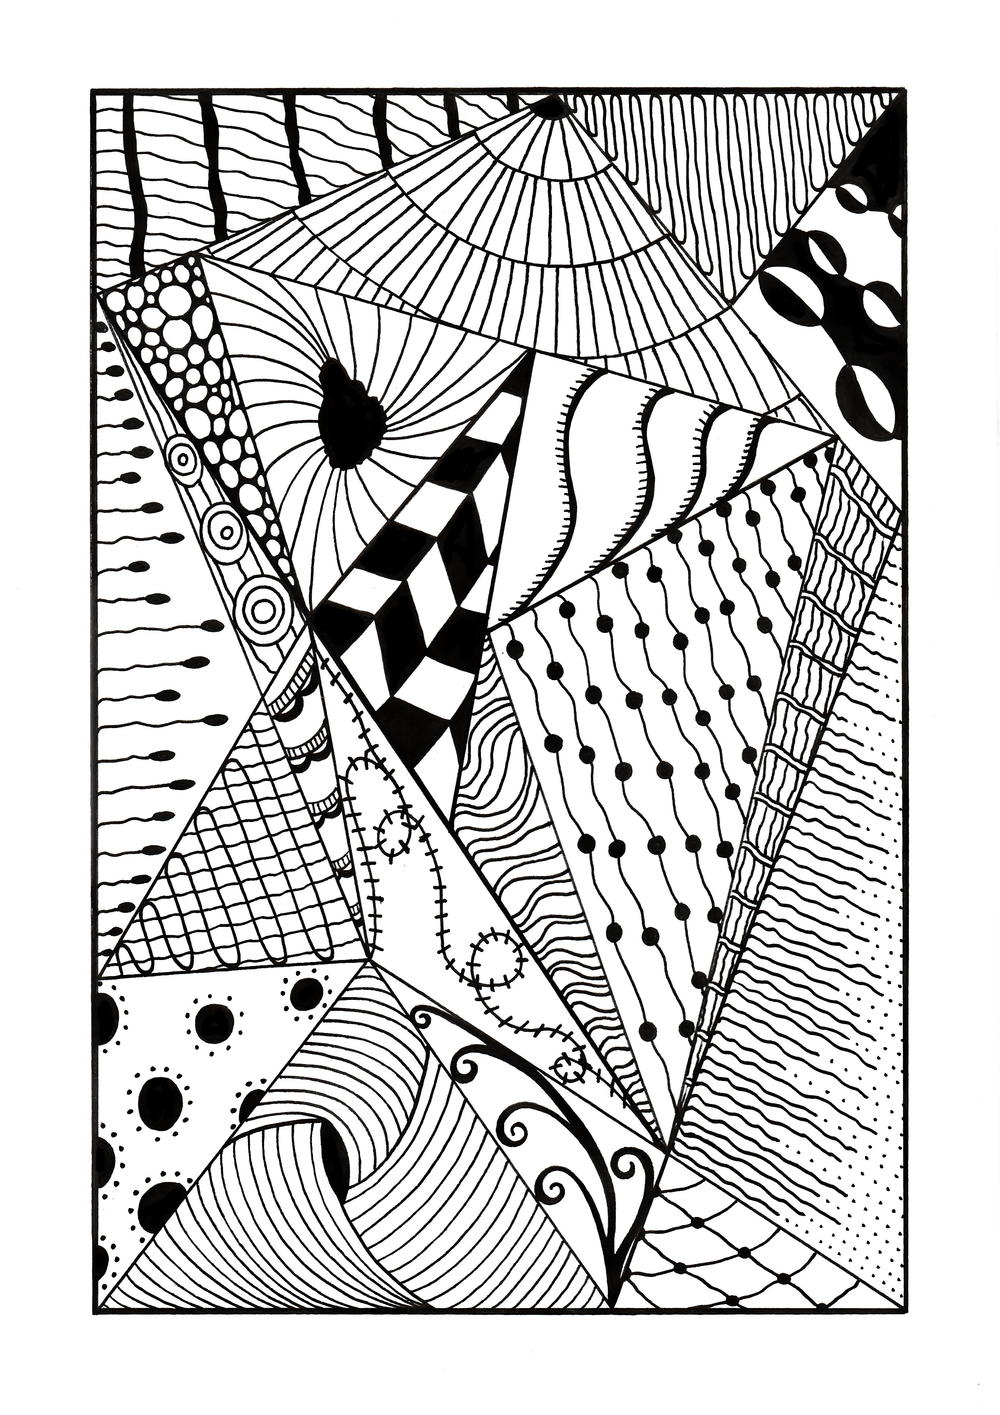 Download Trippy Zentangle Triangles Adult Coloring Page | FaveCrafts.com